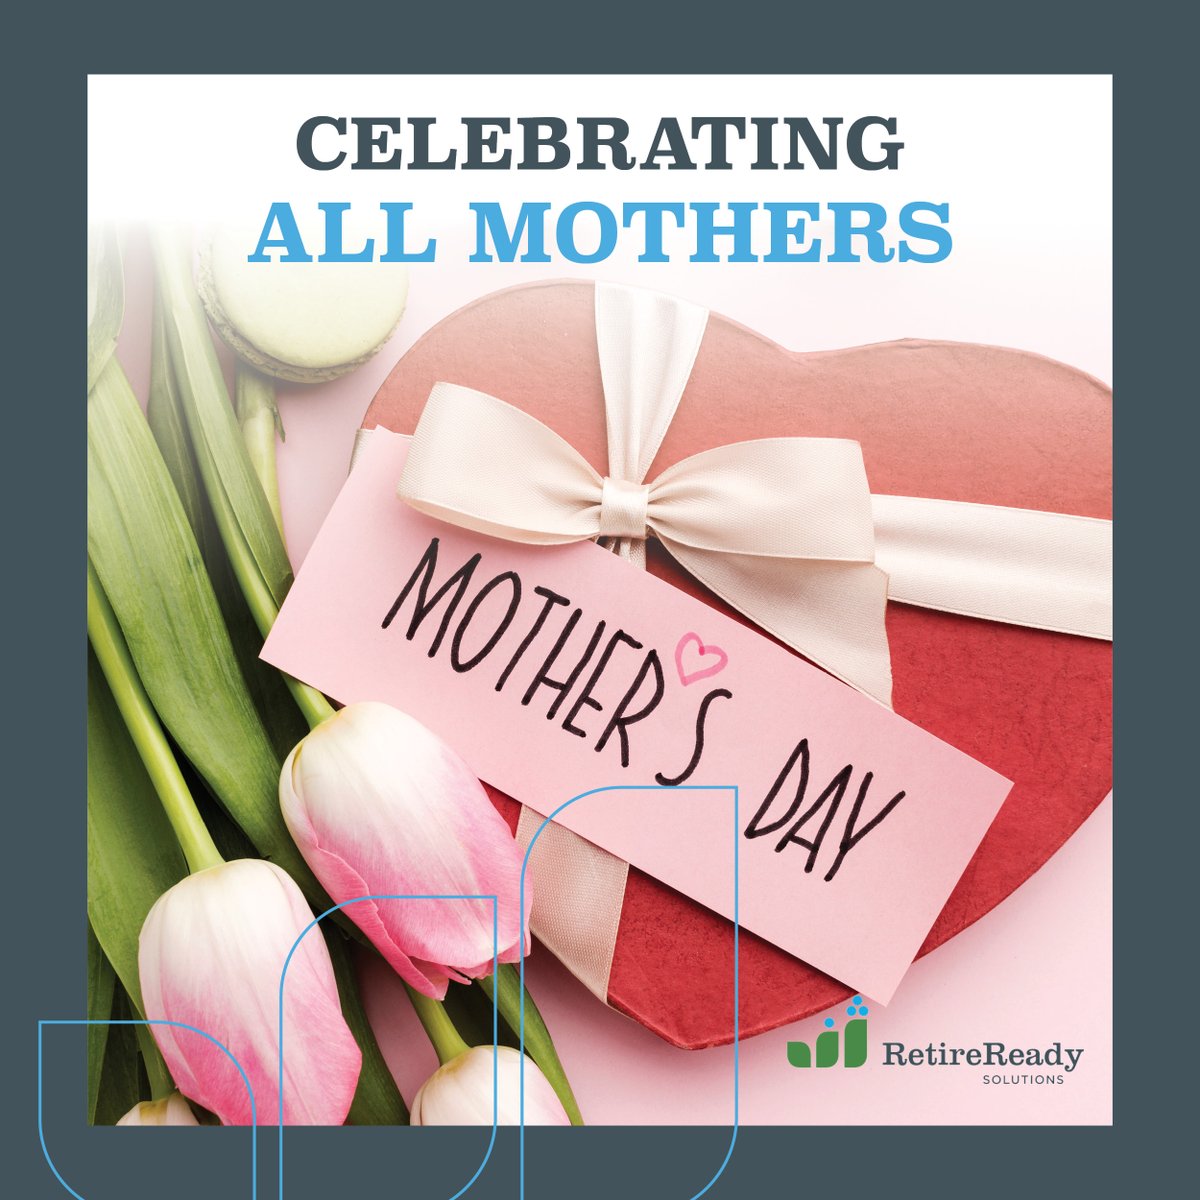 A mother’s love is like nothing else. Today is the perfect time to celebrate all our moms have done for us and everything they mean to us. Happy Mother’s Day! #RetireReady #MothersDay